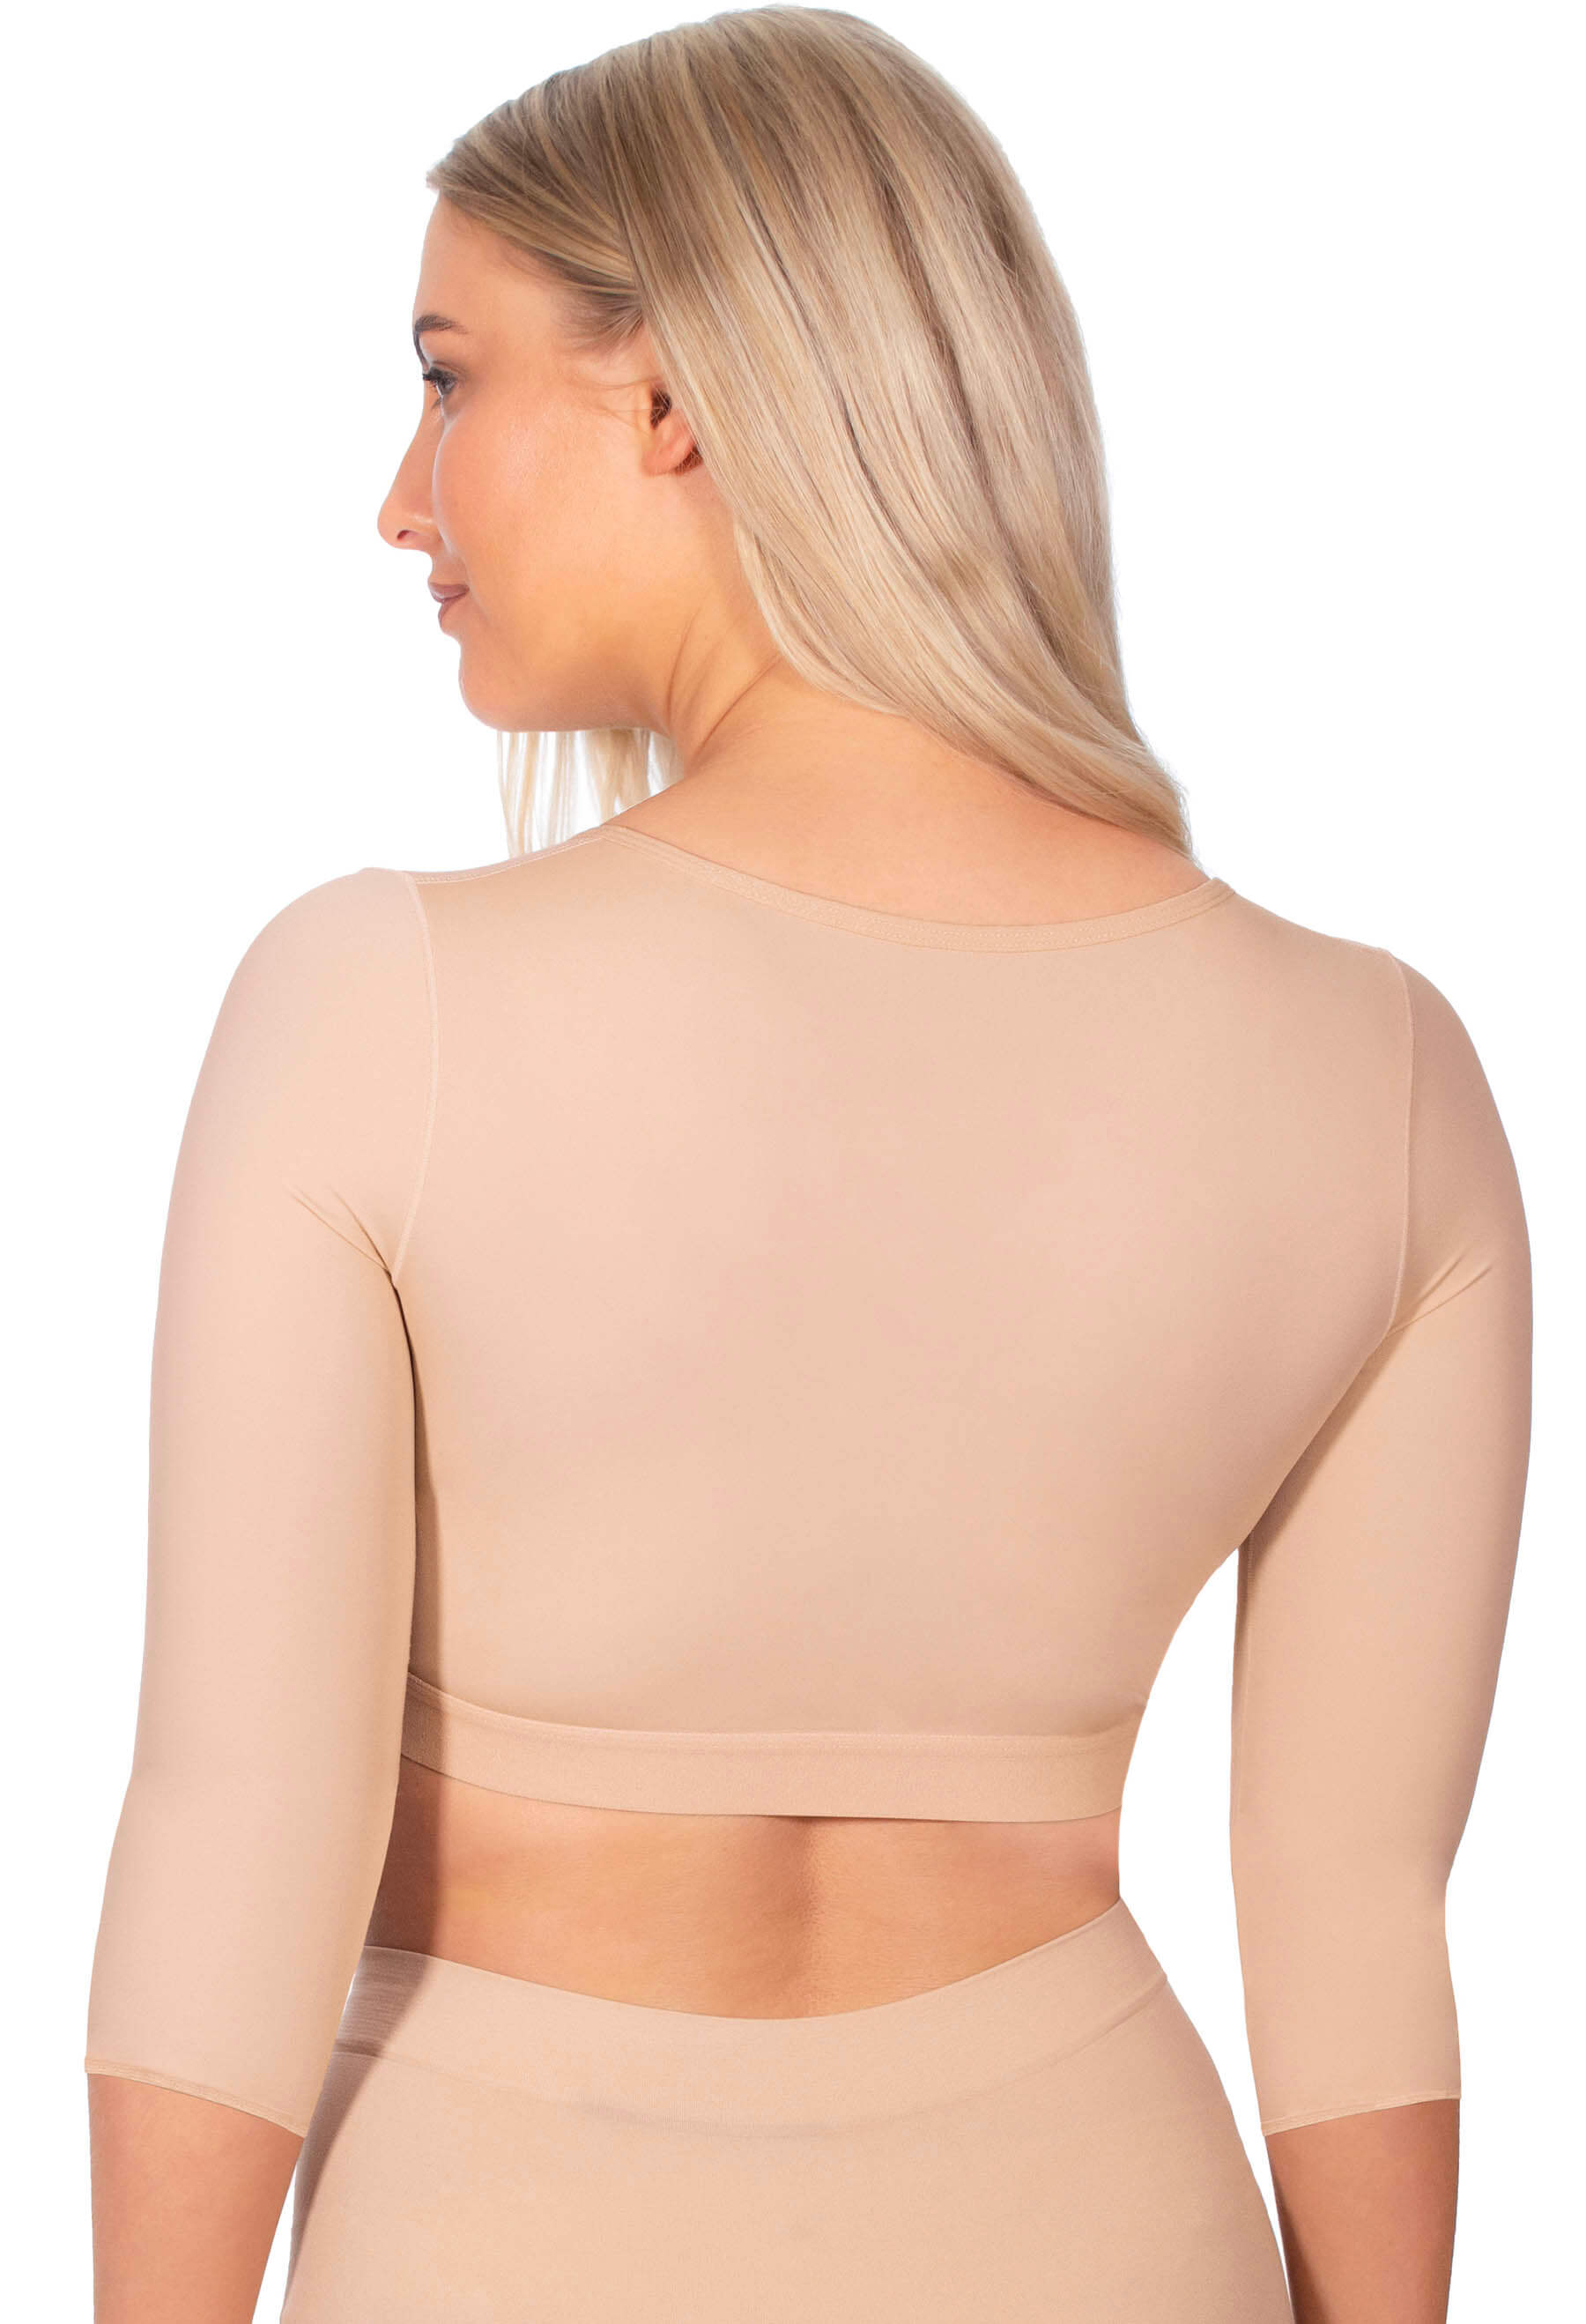 Sleeve Compression Front Bra